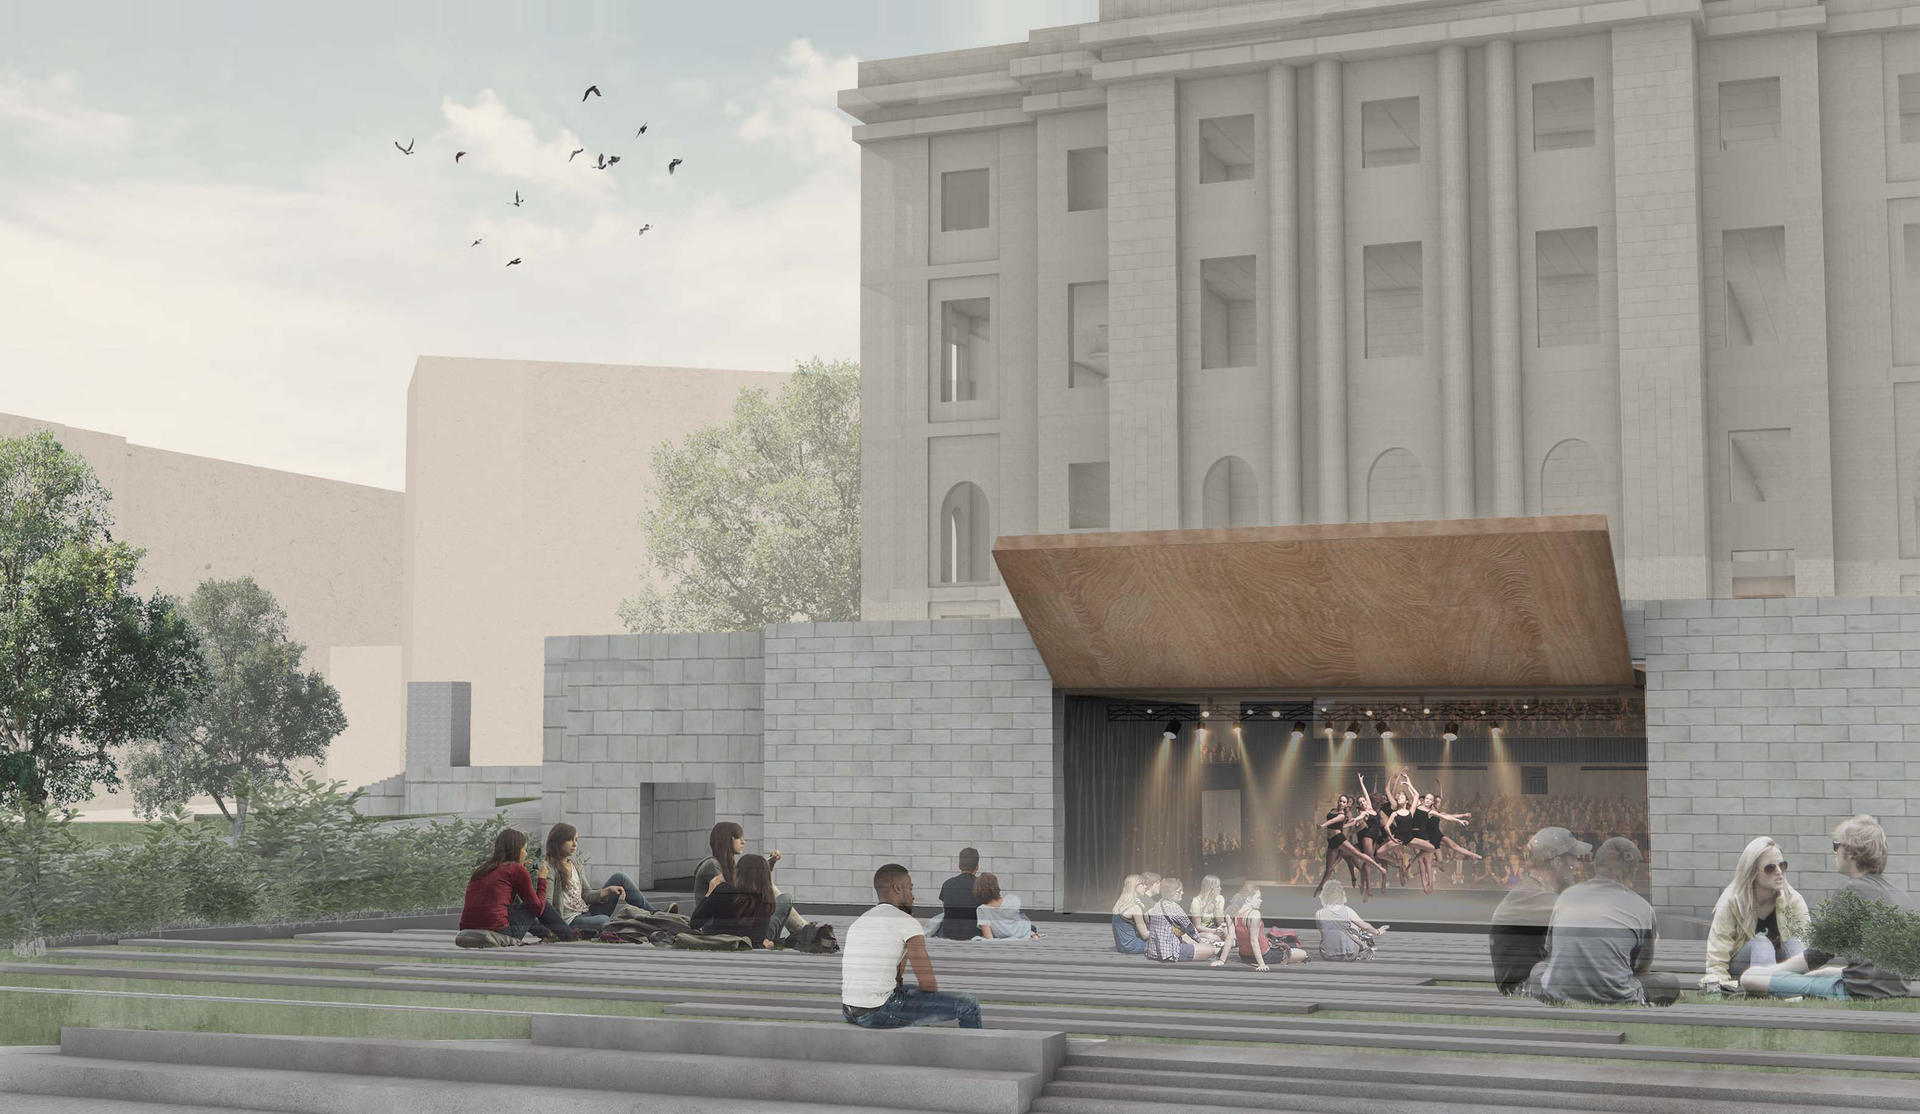 Exterior render showing how the theater is open to the exterior, allowing to enjoy performances during months of good weather and connecting the building to the exterior.